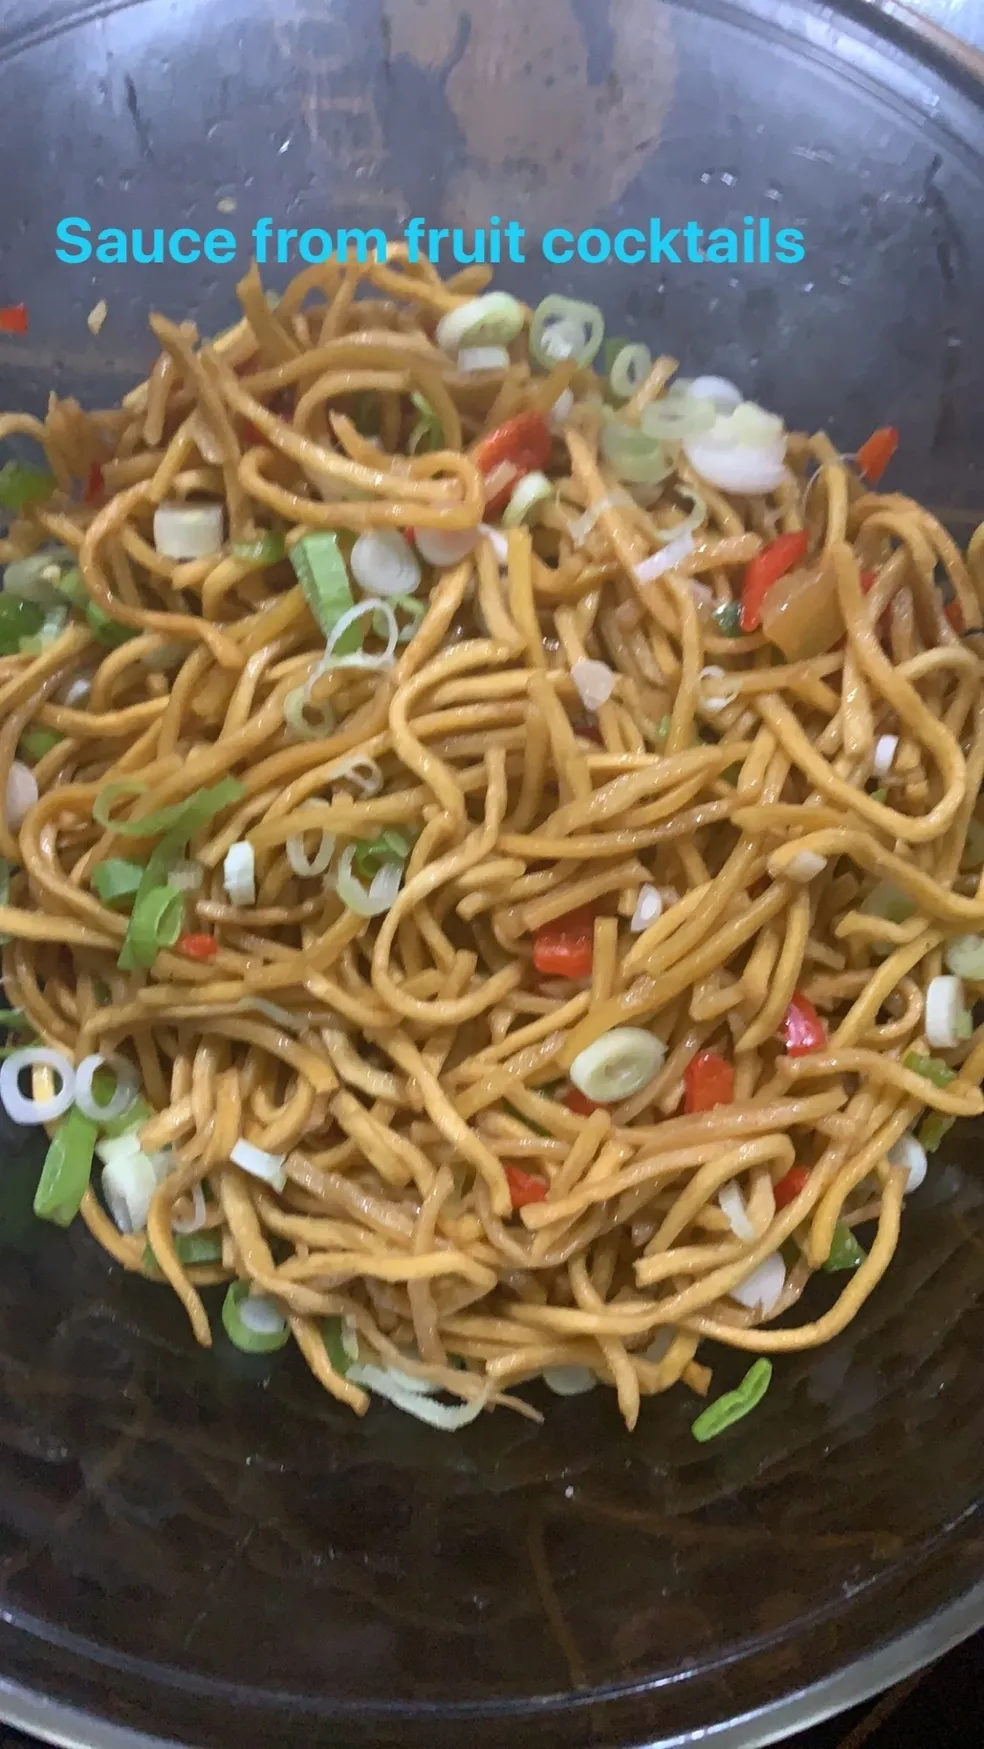 A bowl of noodles with onions and peppers.